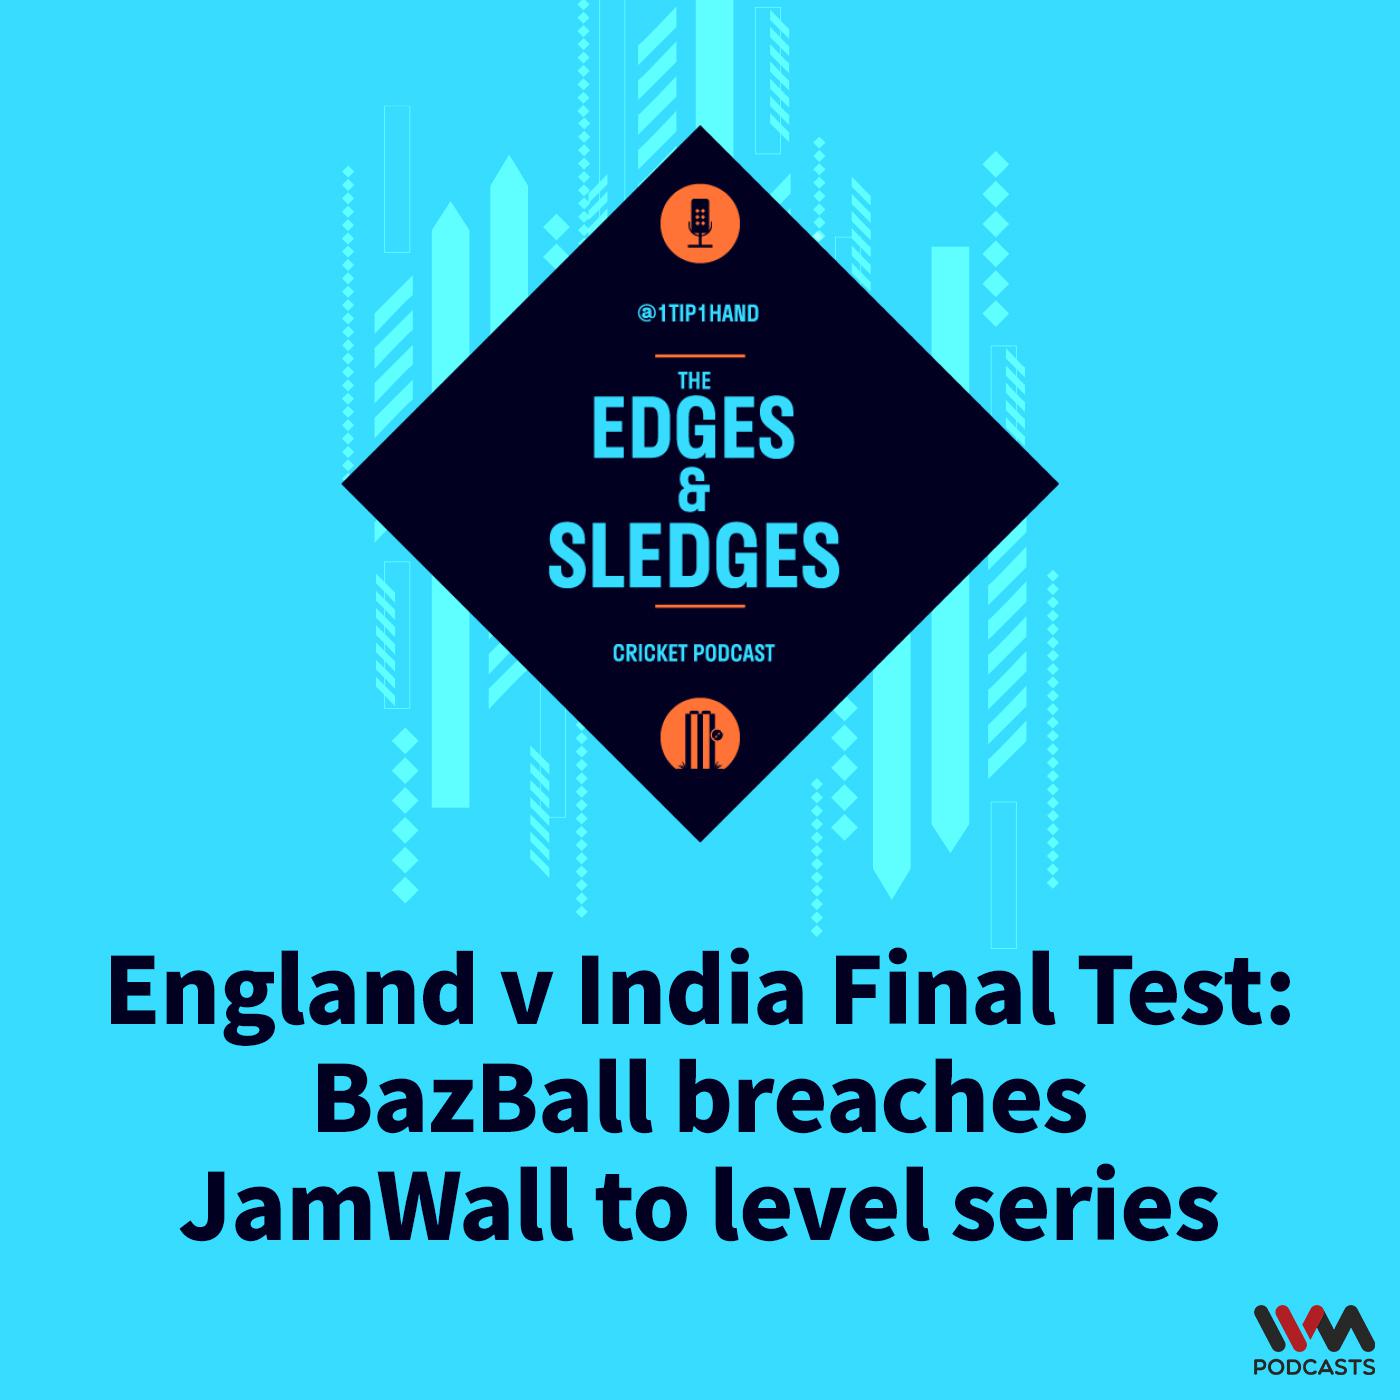 England v India Final Test: BazBall breaches JamWall to level series